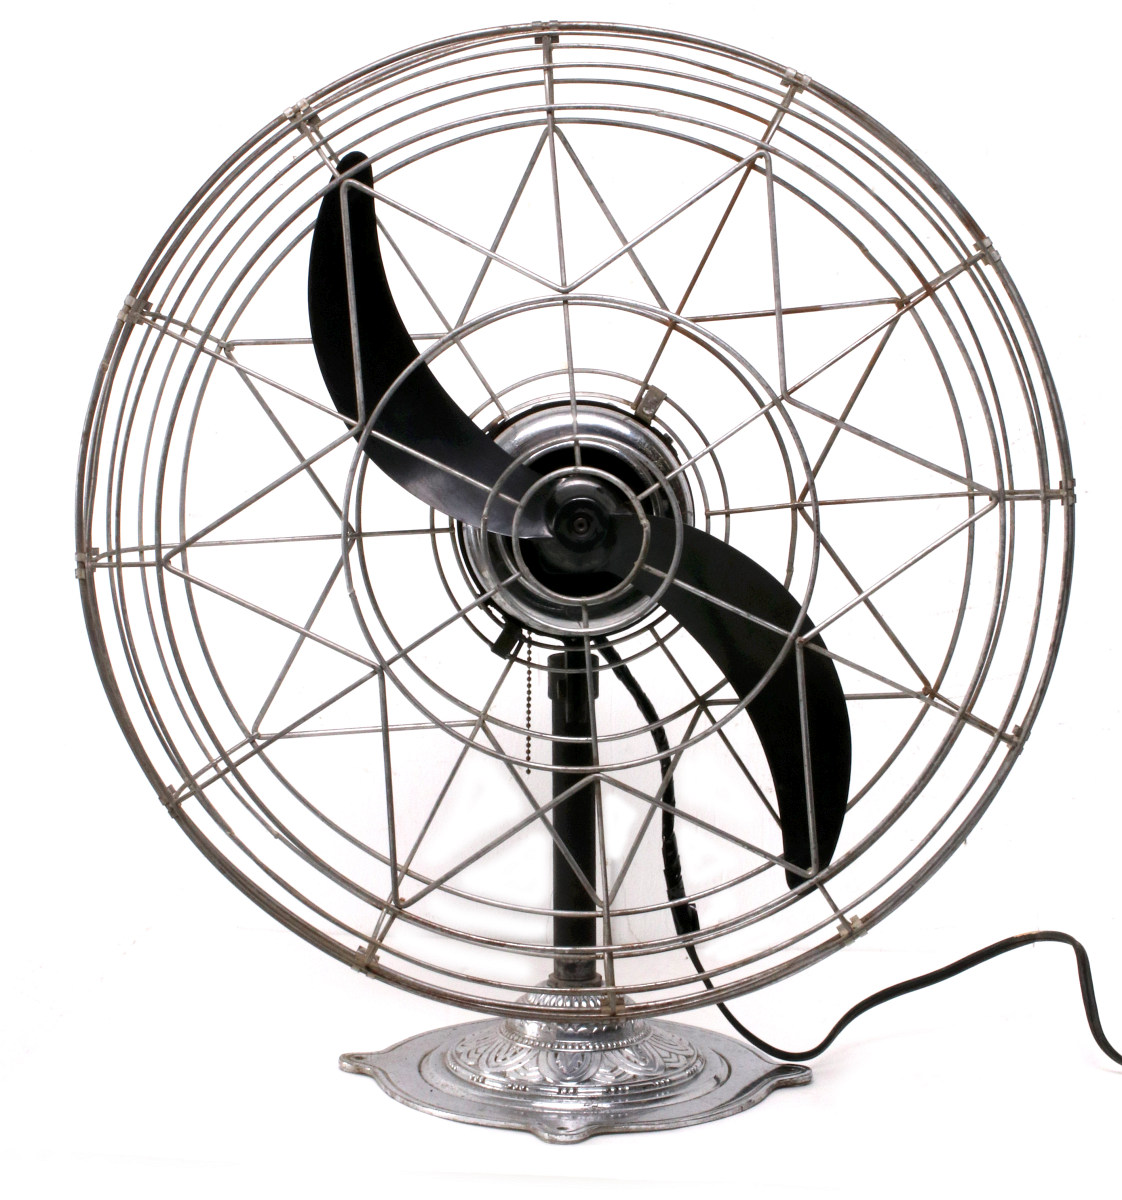 A FRESH'NDAIRE 'SPECIAL' COMMERCIAL FAN CIRCA 1950